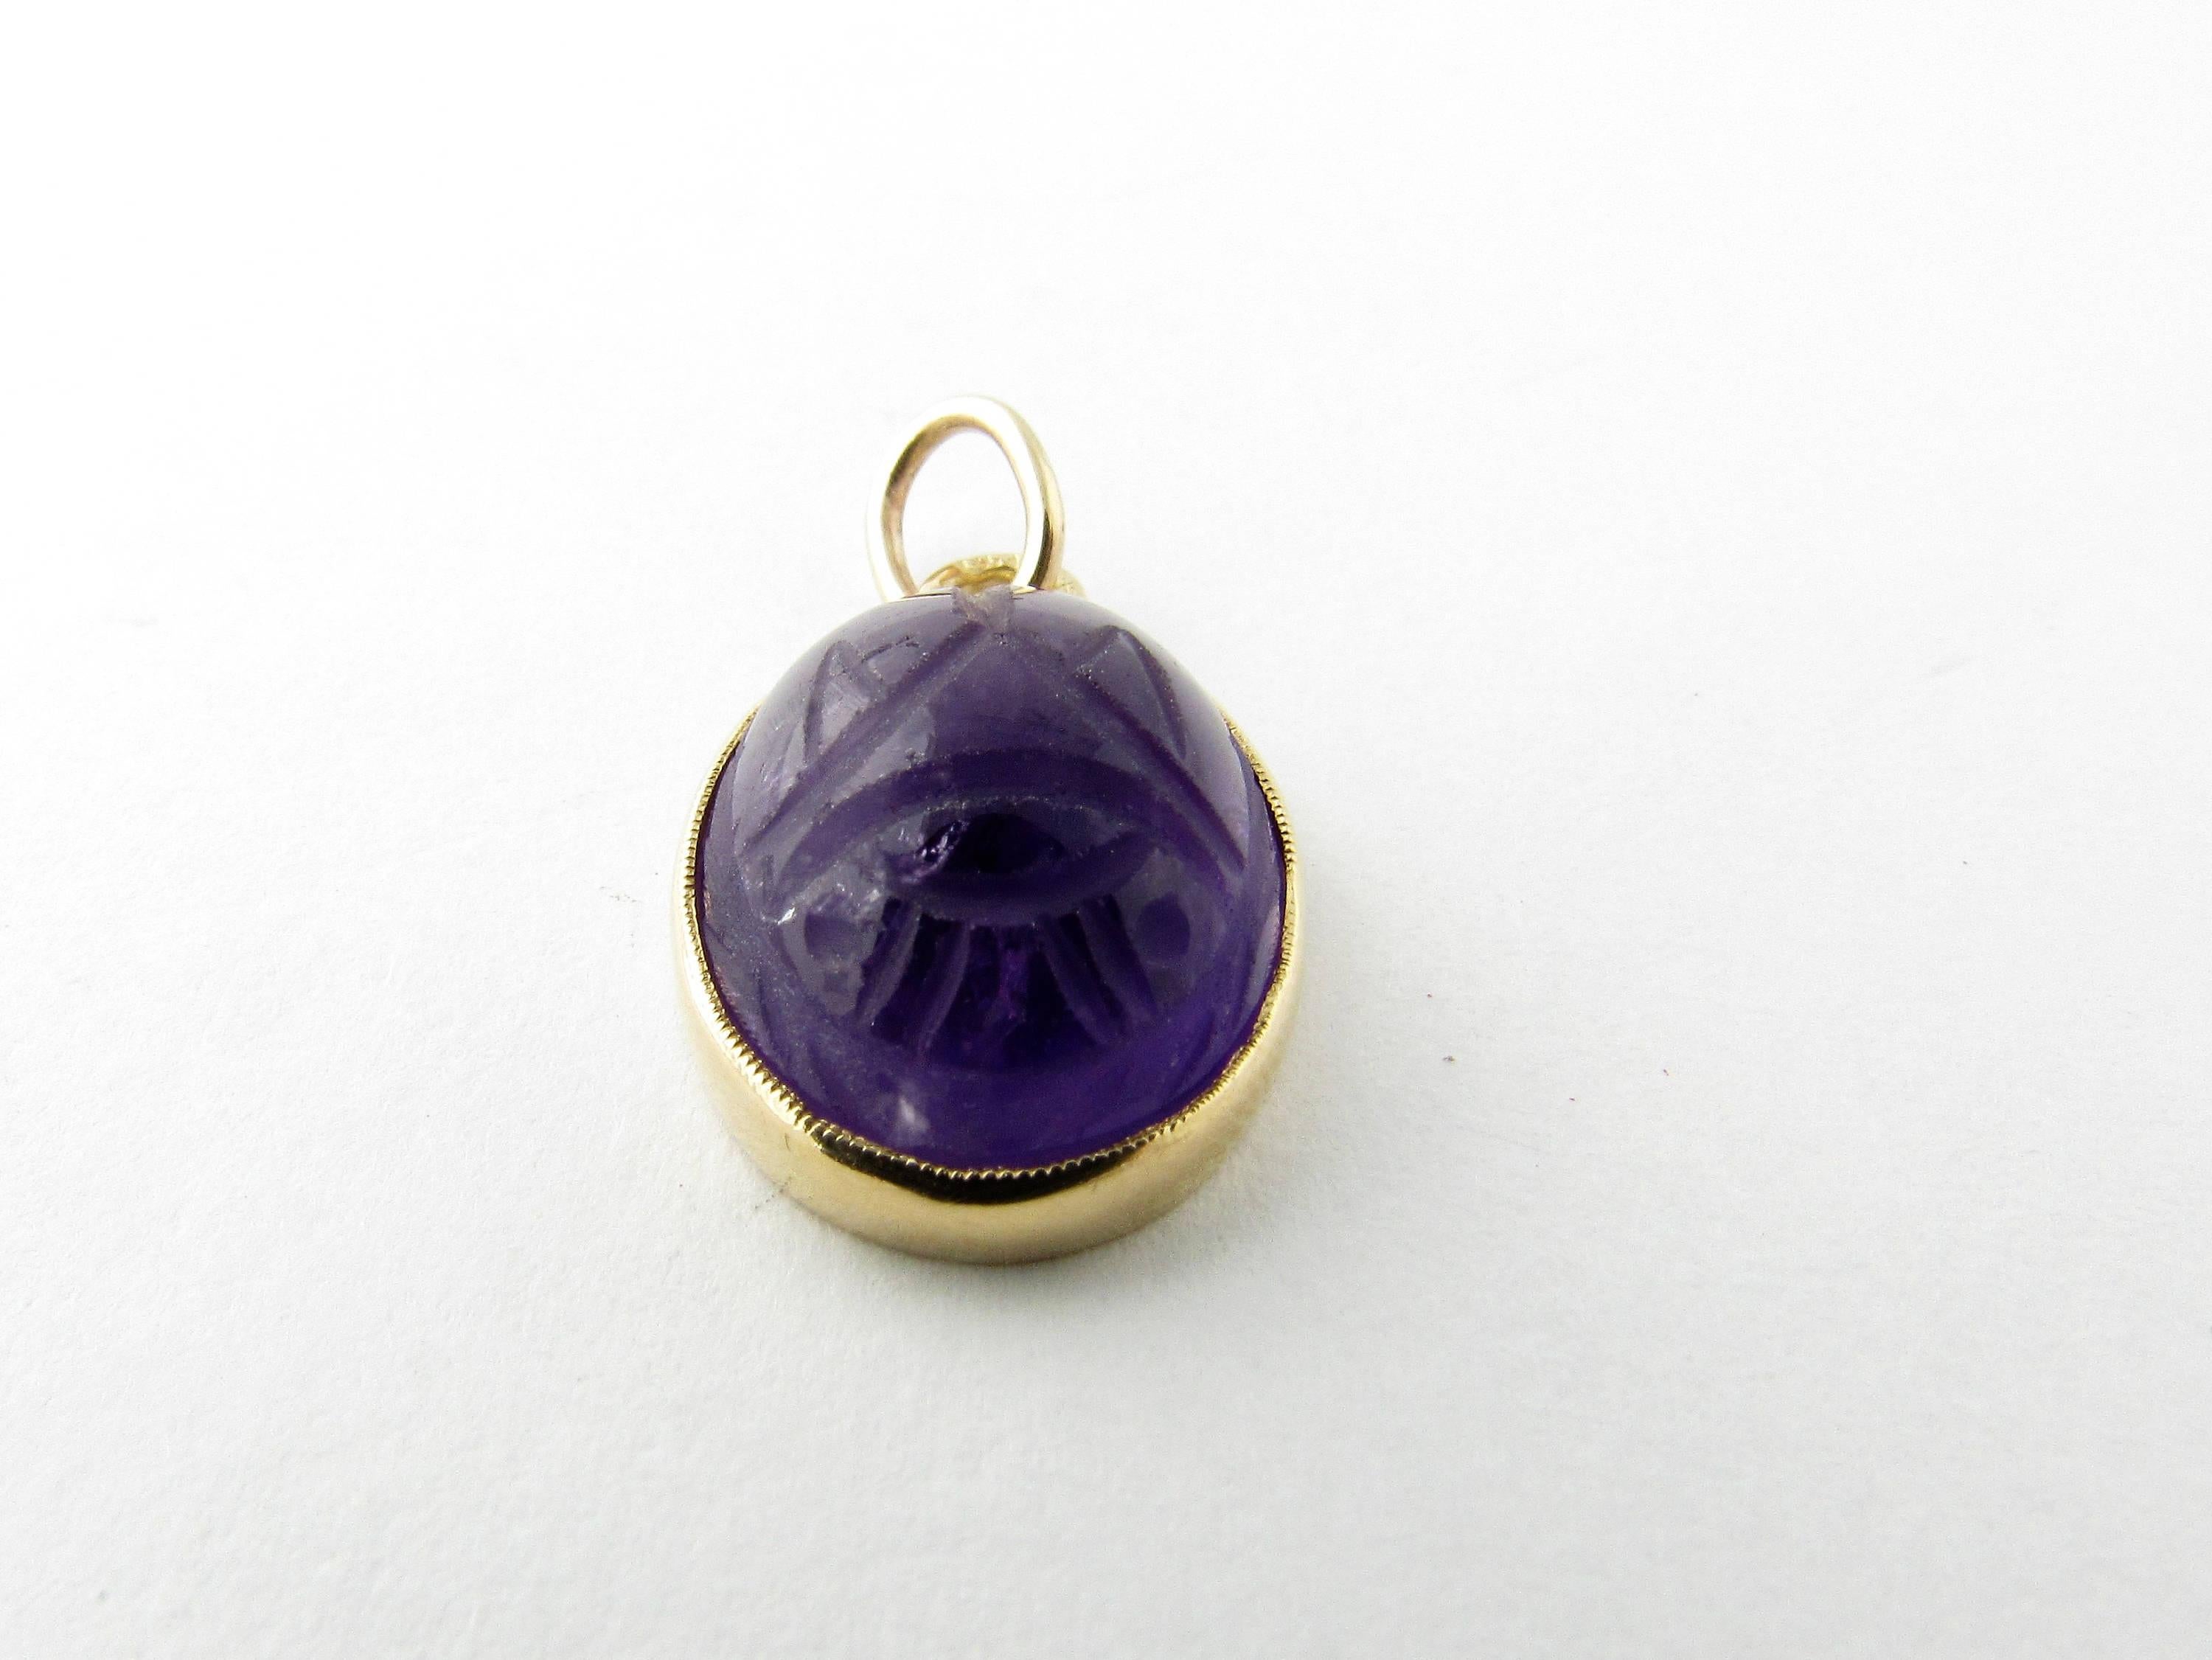 Vintage 14 Karat Yellow Gold Amethyst Scarab Pendant-

This lovely pendant features a scarab carved from genuine amethyst framed in 14K yellow gold.

Size: 20 mm x  13 mm 

Weight: 1.6 dwt. /  2.5 gr. 

Hallmark: 585

Very good condition,